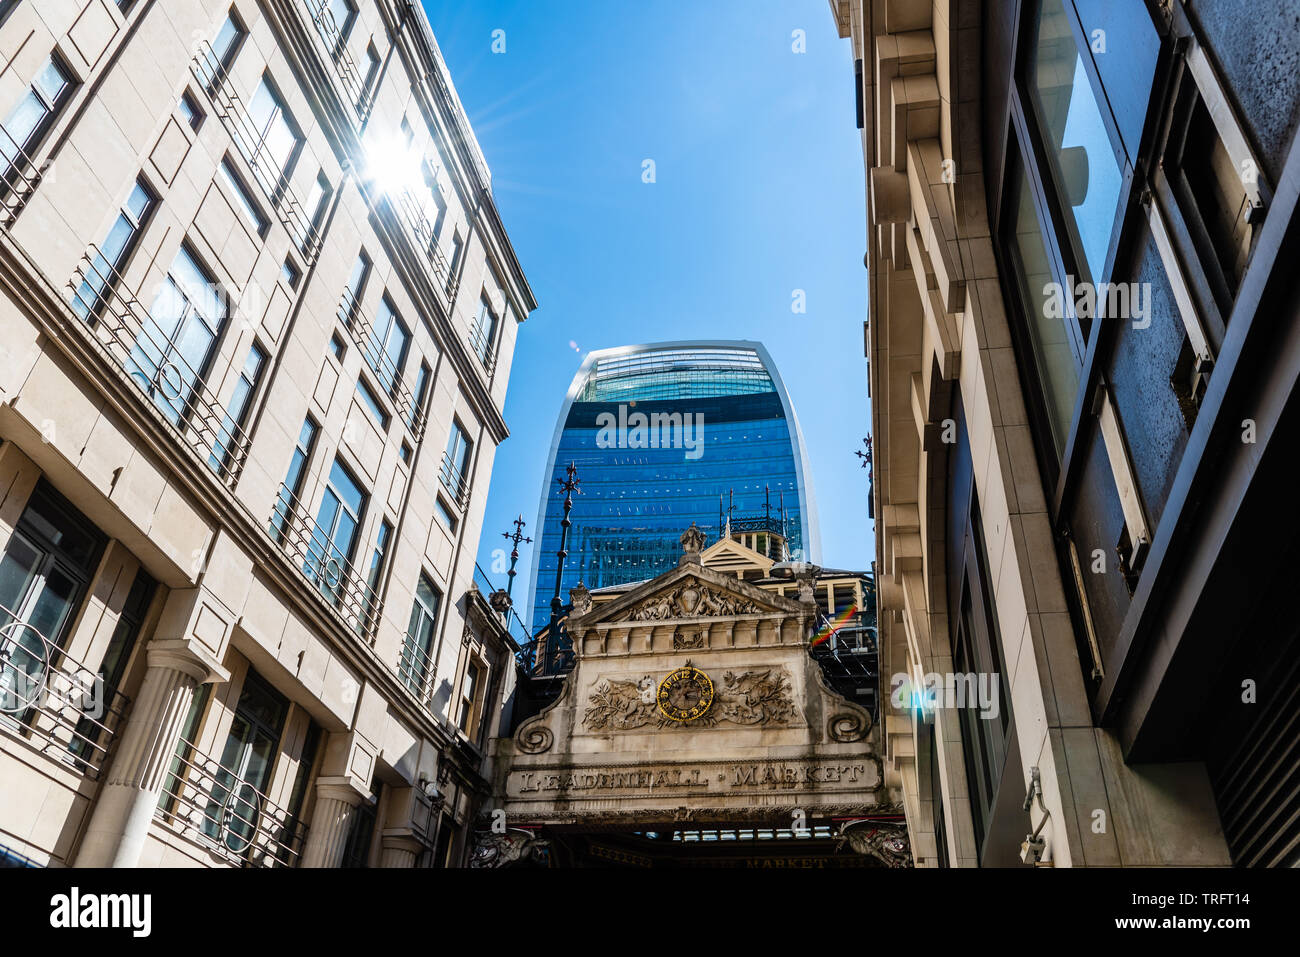 London, UK - May 14, 2019:  Low angle view of the entrance to Leadenhall Market and The Gherkin skyscraper in the City of London against blue sky. Stock Photo